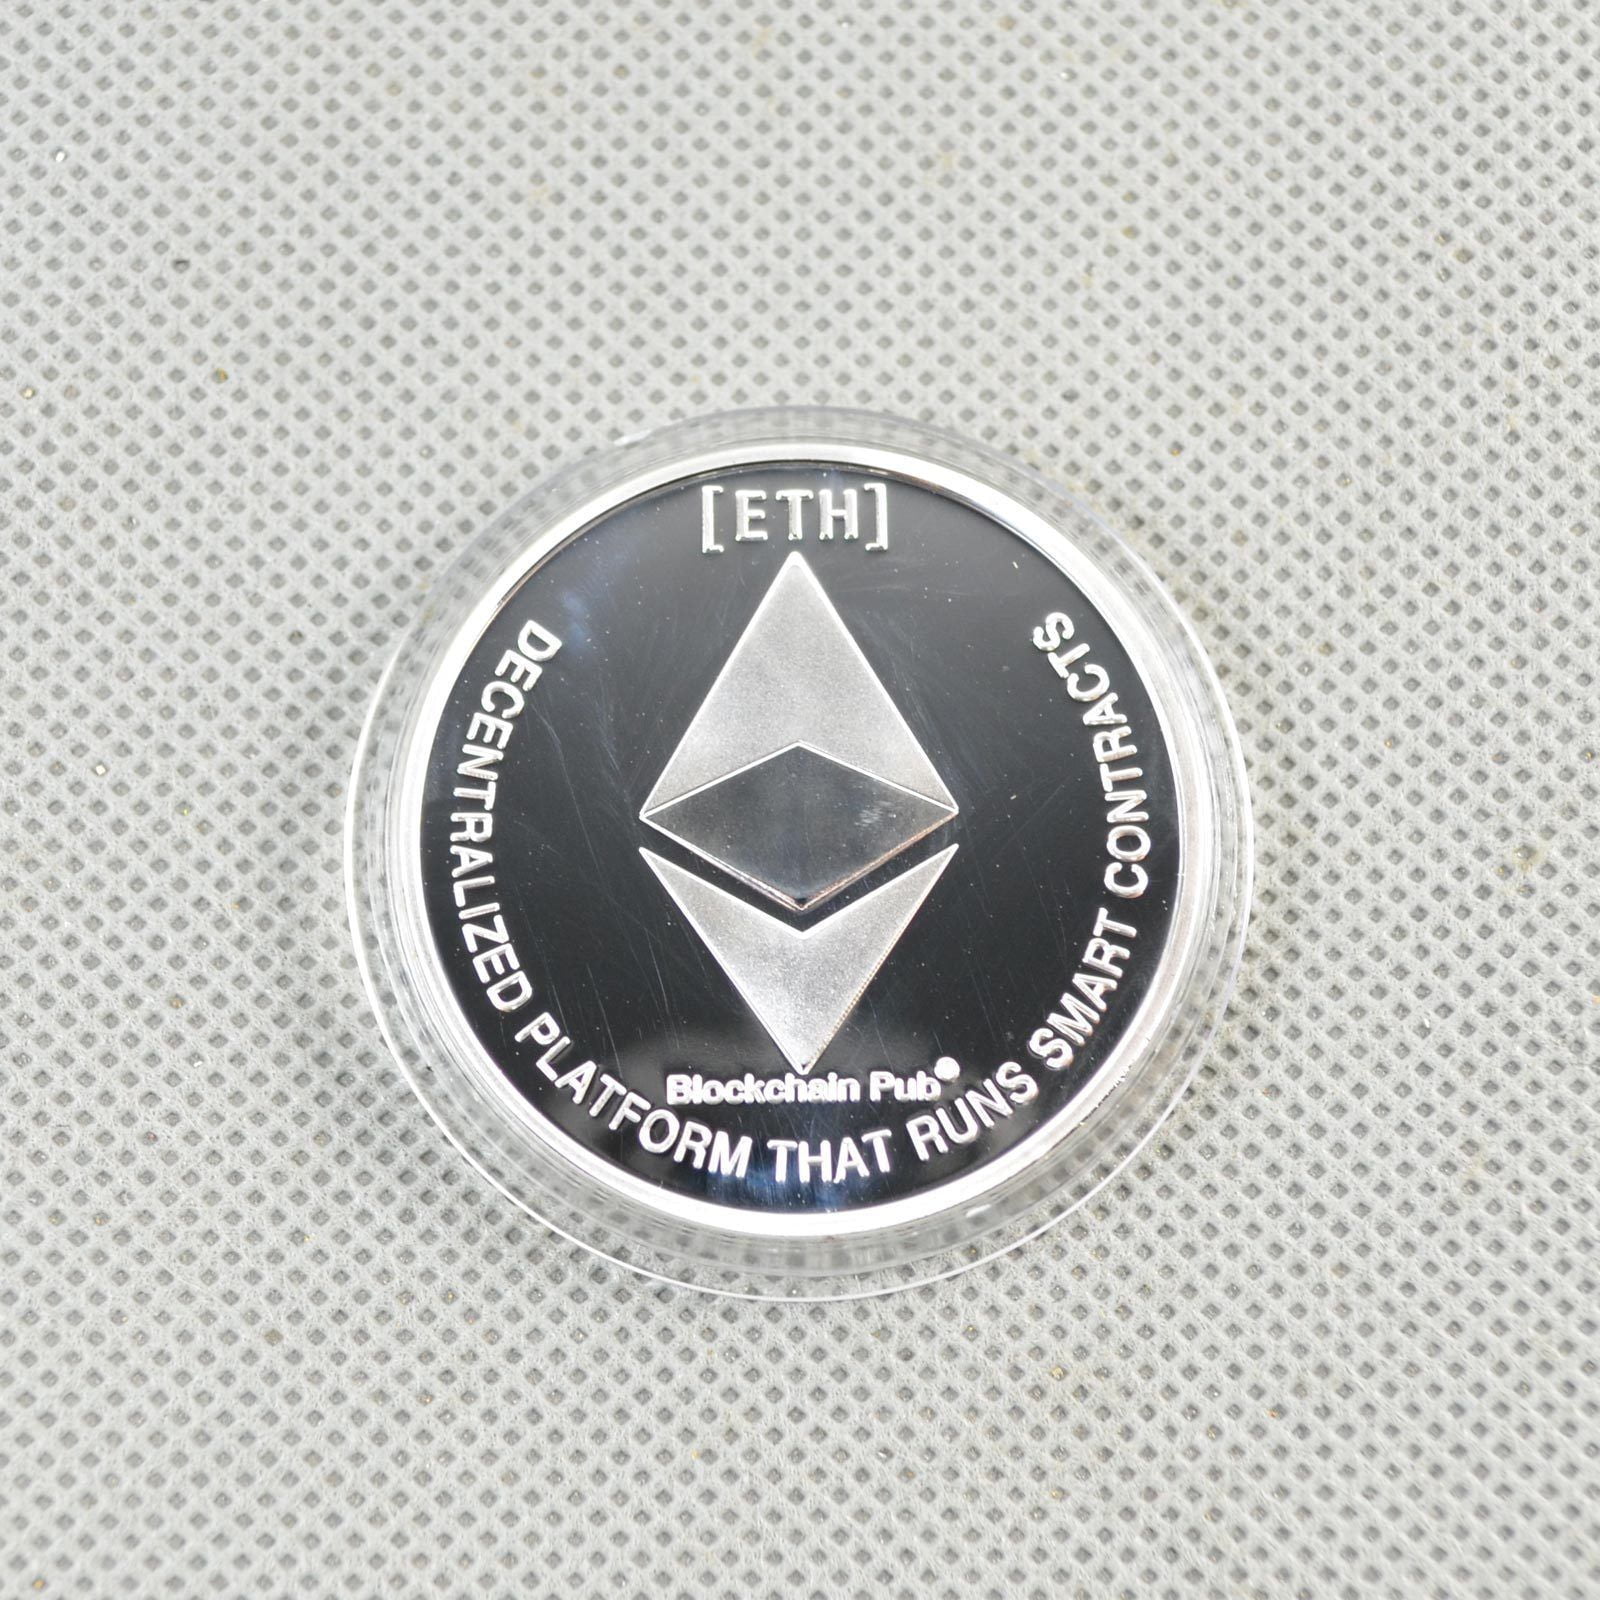 Silver Plated Physical Commemorative Coins Collectible ETH Ethereum Miner Coin 